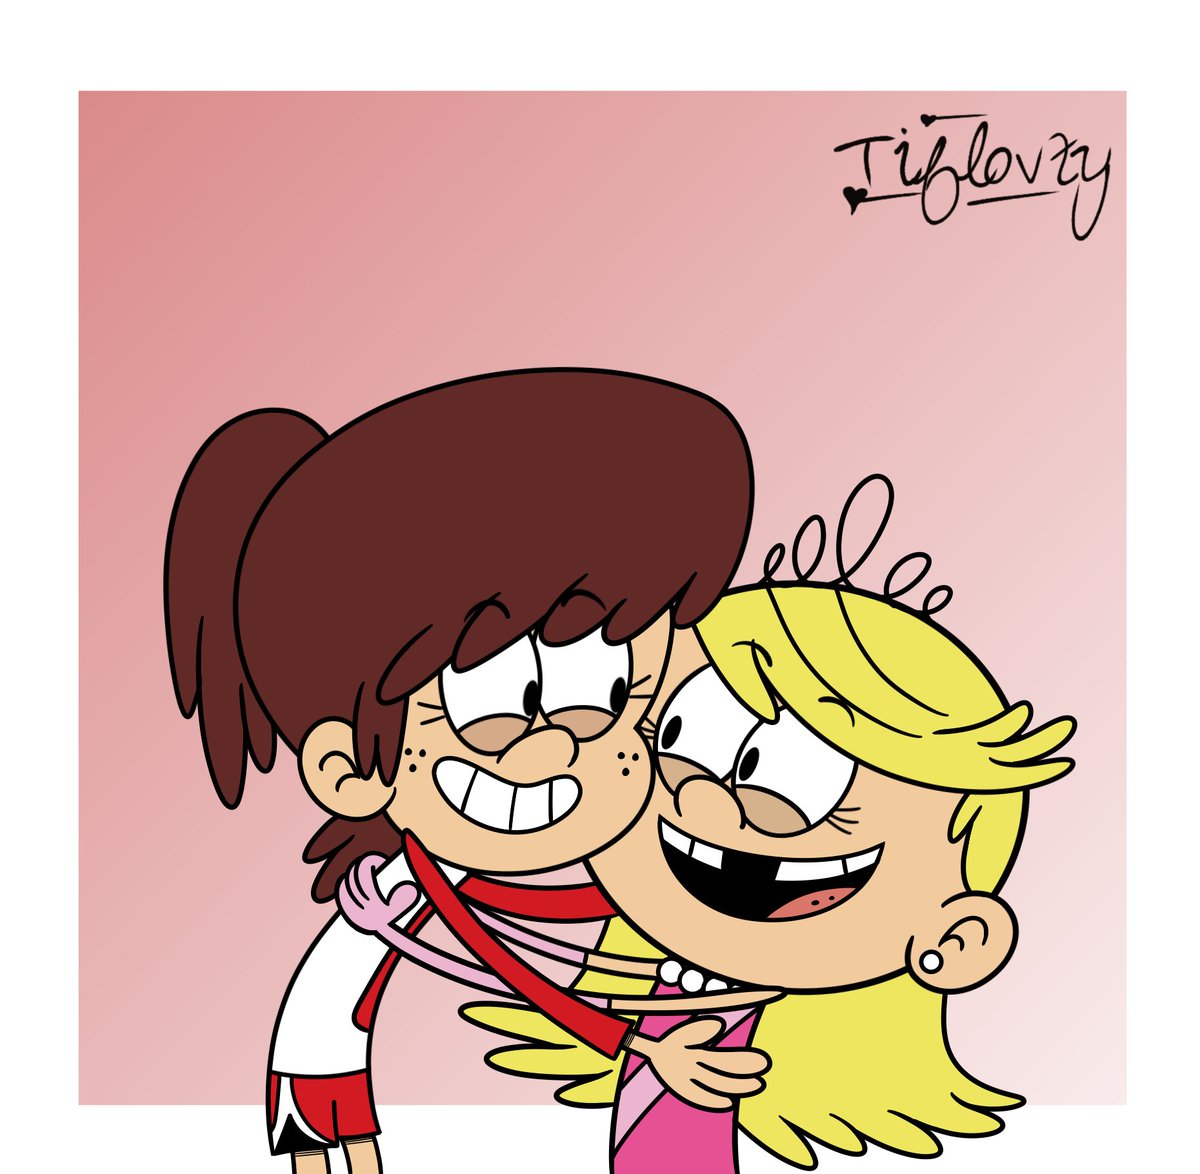 My beautiful babies💗❤️💗❤️💗❤️💗 Guys... thank you very much for the 440 followers!! 🥺

#TheLoudHouse #loudhouse #TLH #nickelodeon #fanart #LynnLoud #LynnLoudjr #LolaLoud #ArtistOnTwitter #theloudhouseFanart